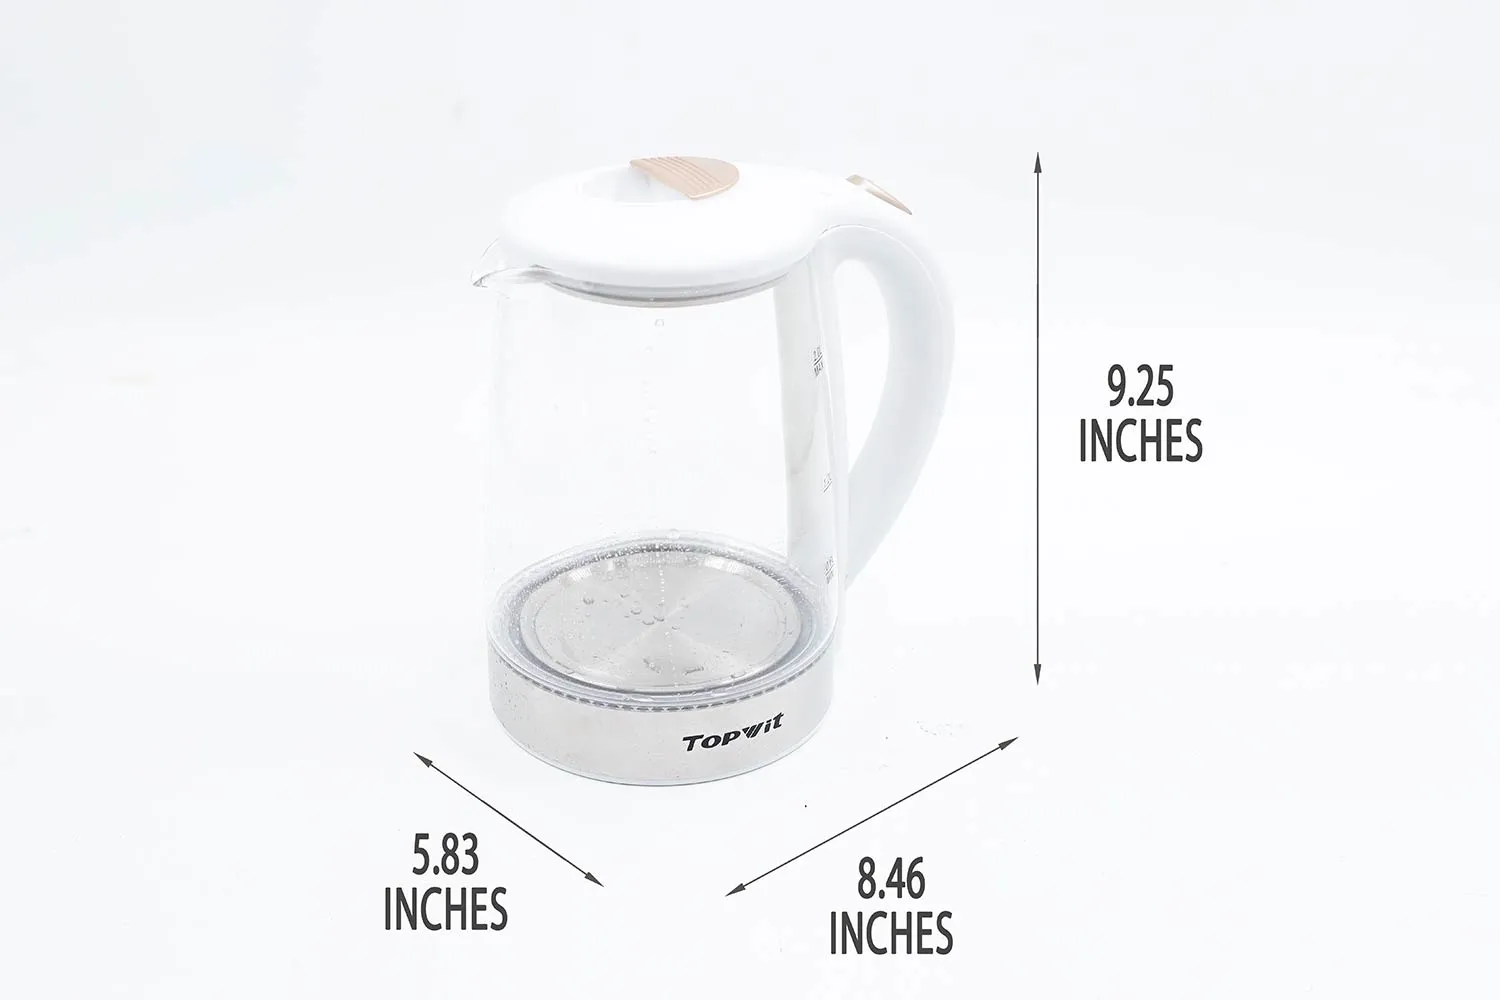 https://cdn.healthykitchen101.com/reviews/images/kettles/topwit-electric-kettle-t630-dimensions-clo6w6r35000usw883gayeba2.jpg